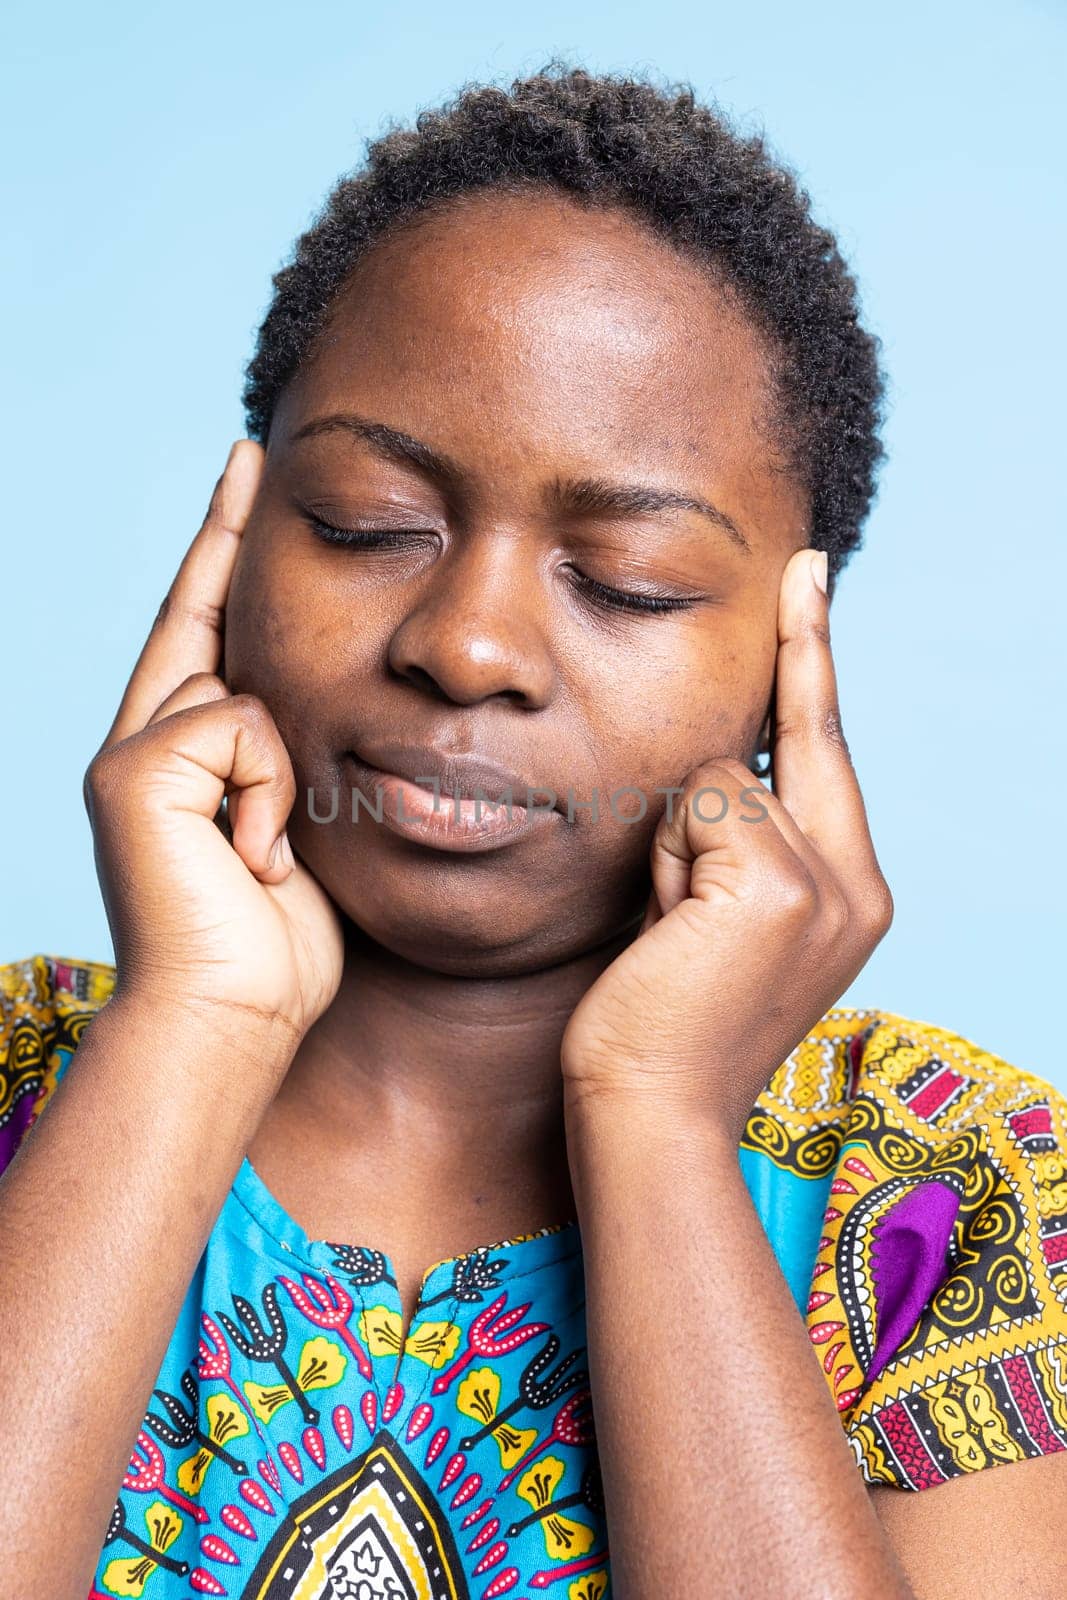 African american girl being unwell with serious migraine, experiencing flu symptoms against blue background. Sick woman in pain having medical issues, painful headache in studio.